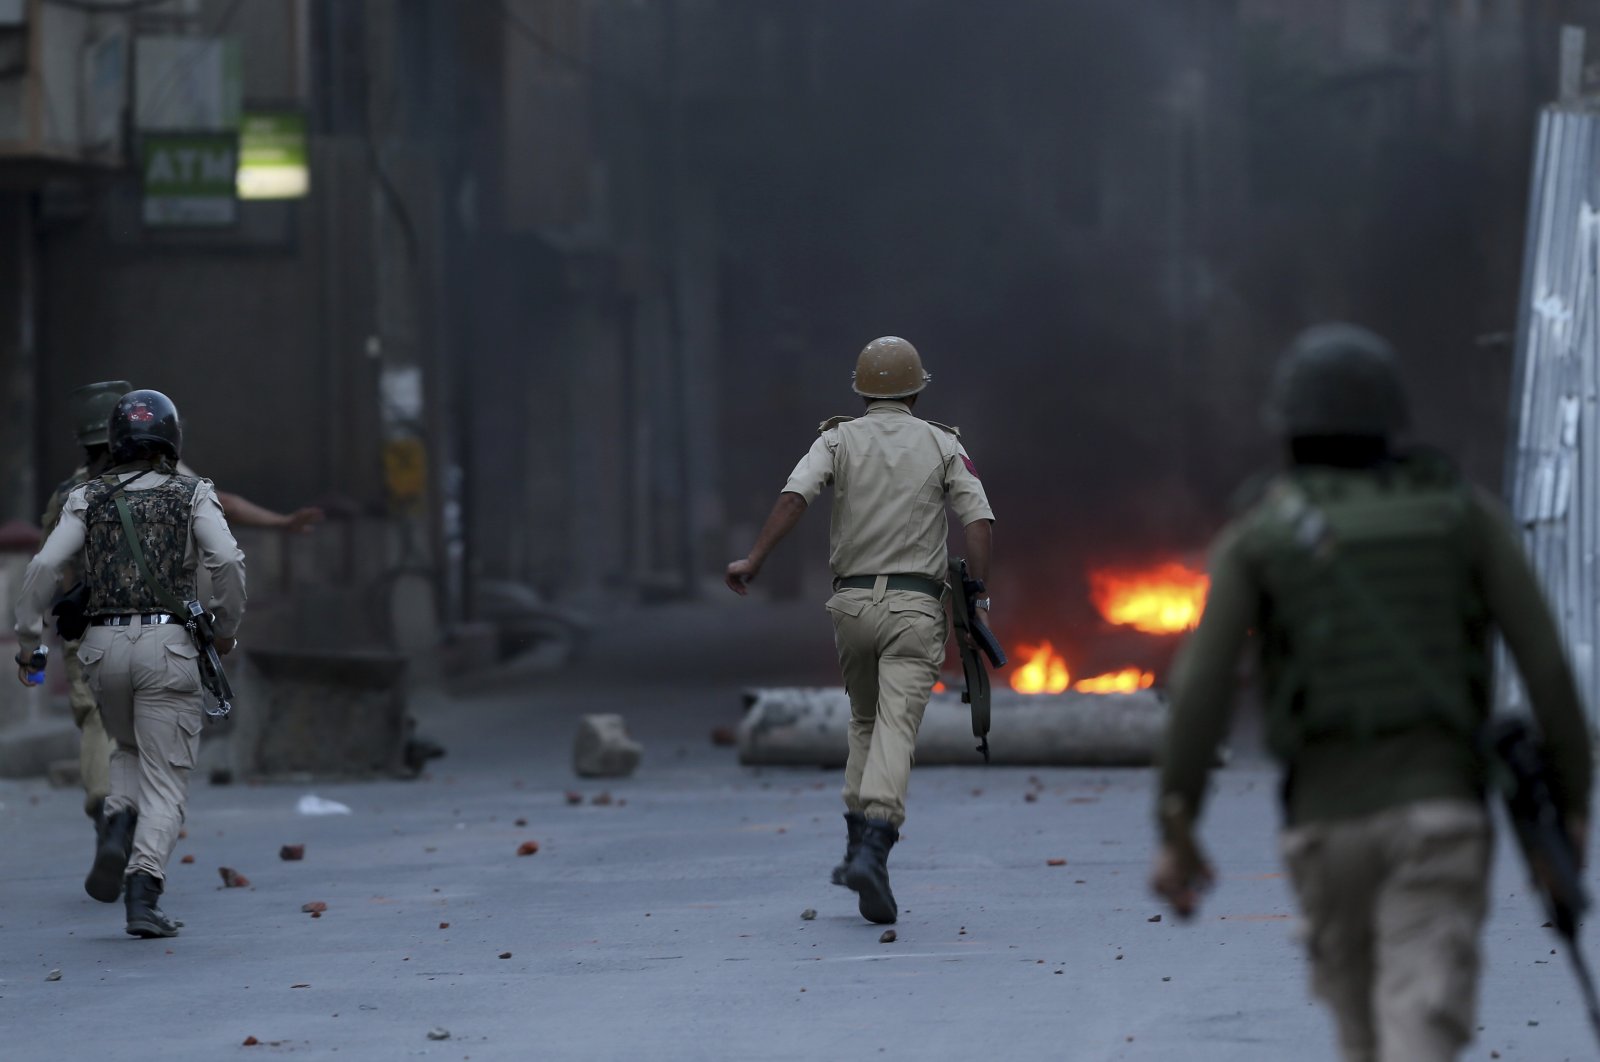 Indian police officers chase Kashmiris during a protest in Srinagar, Indian-controlled Kashmir, June 21, 2018. (AP Photo)